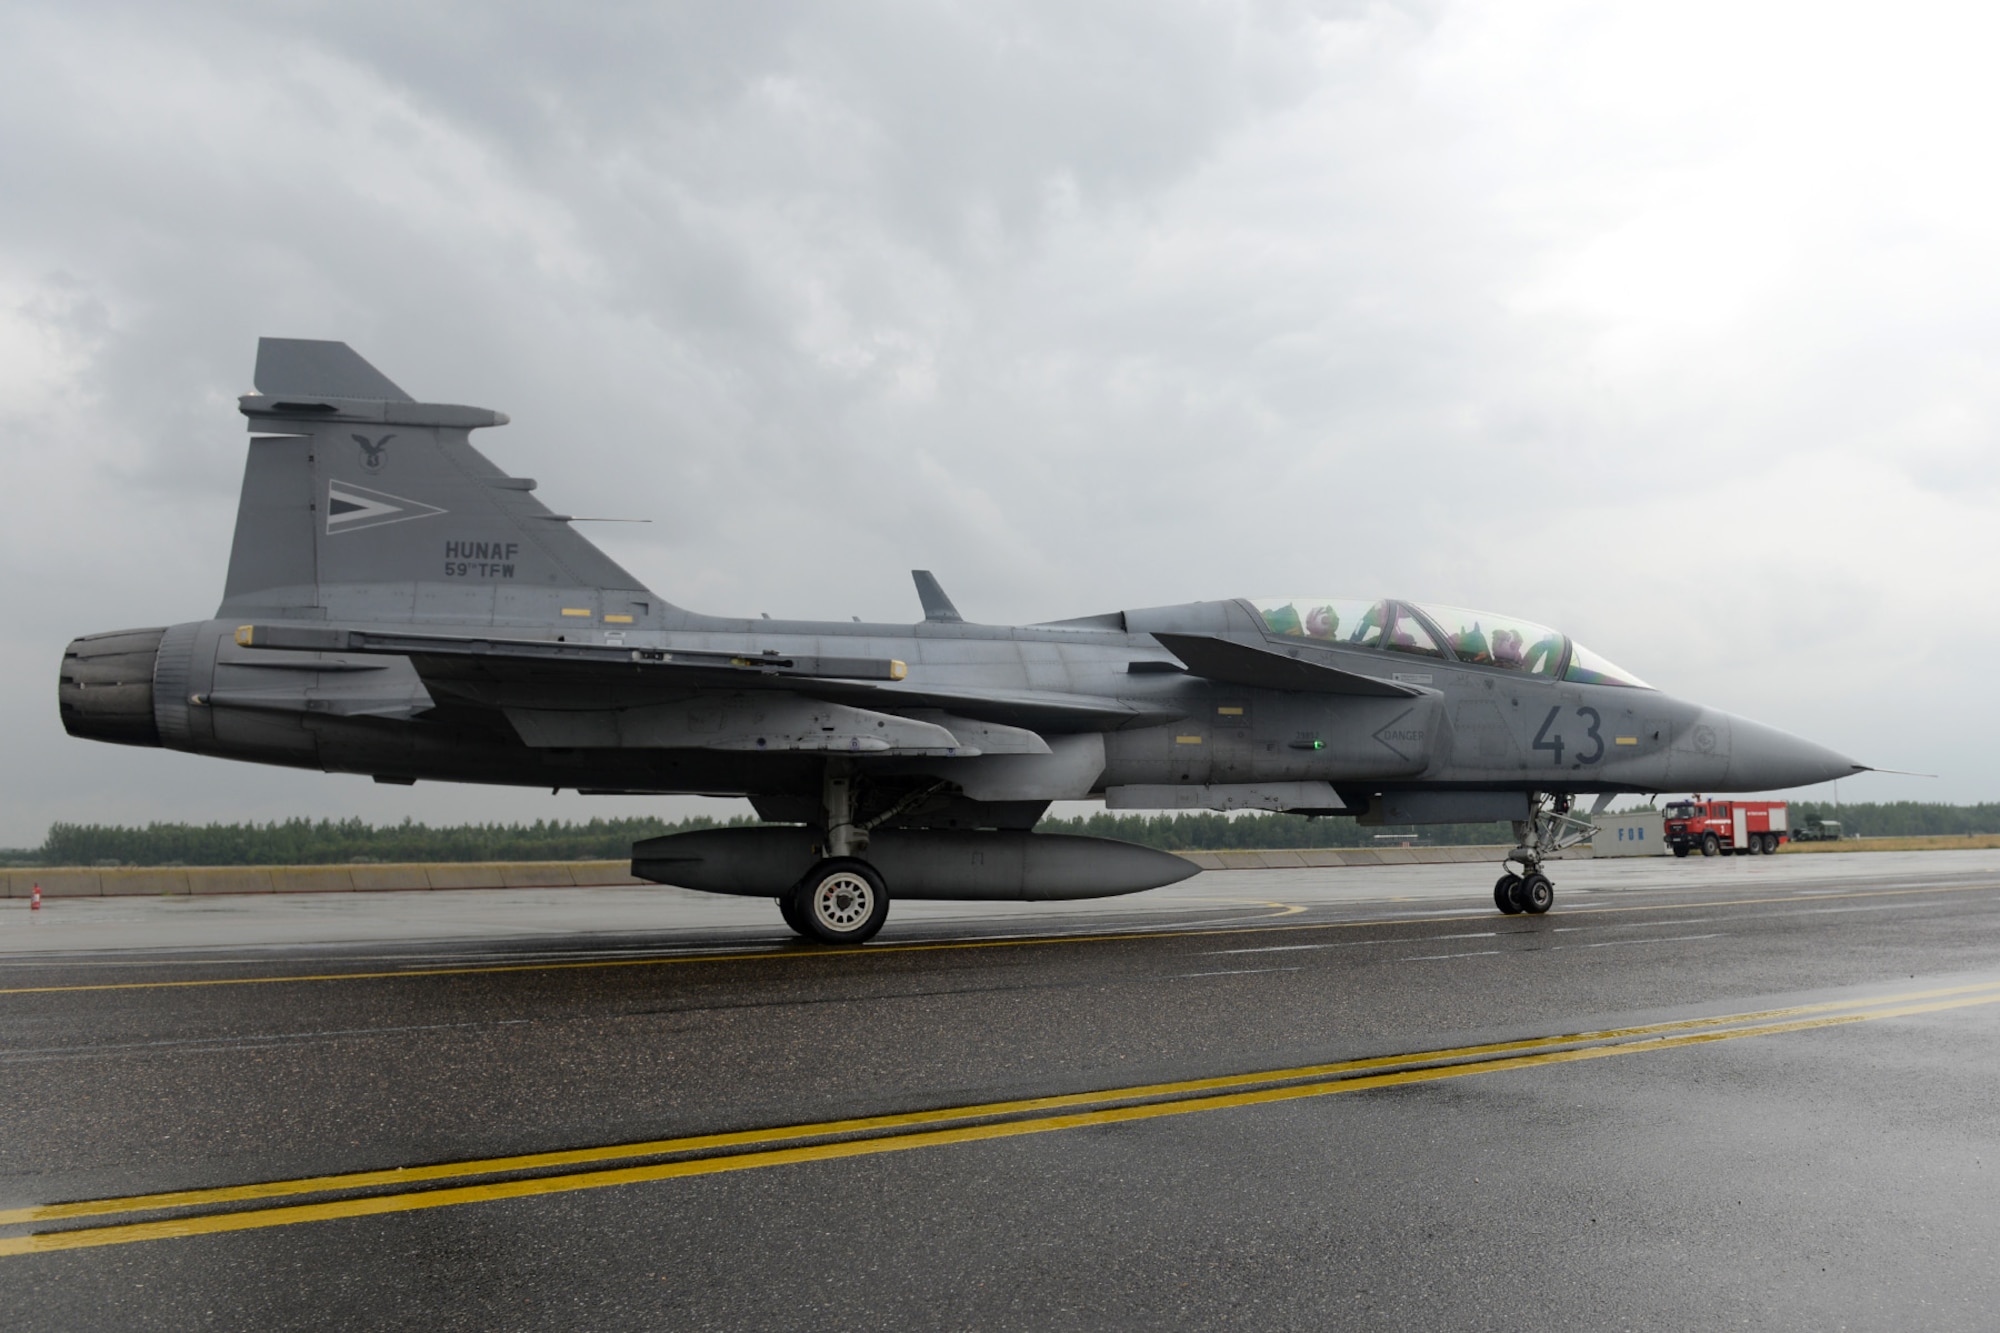 A Hungarian air force JAS-39 Gripen taxis for take-off June 24, 2015, during air refueling familiarization training on Kecskemét air base, Hungary. Hungarian, U.S. and Swedish air force personnel met for a two-week familiarization period enabling the Hungarian JAS-39 Gripen pilots to successfully perform air refueling for the first time. (U.S. Air Force photo by Senior Airman Kate Thornton/Released)